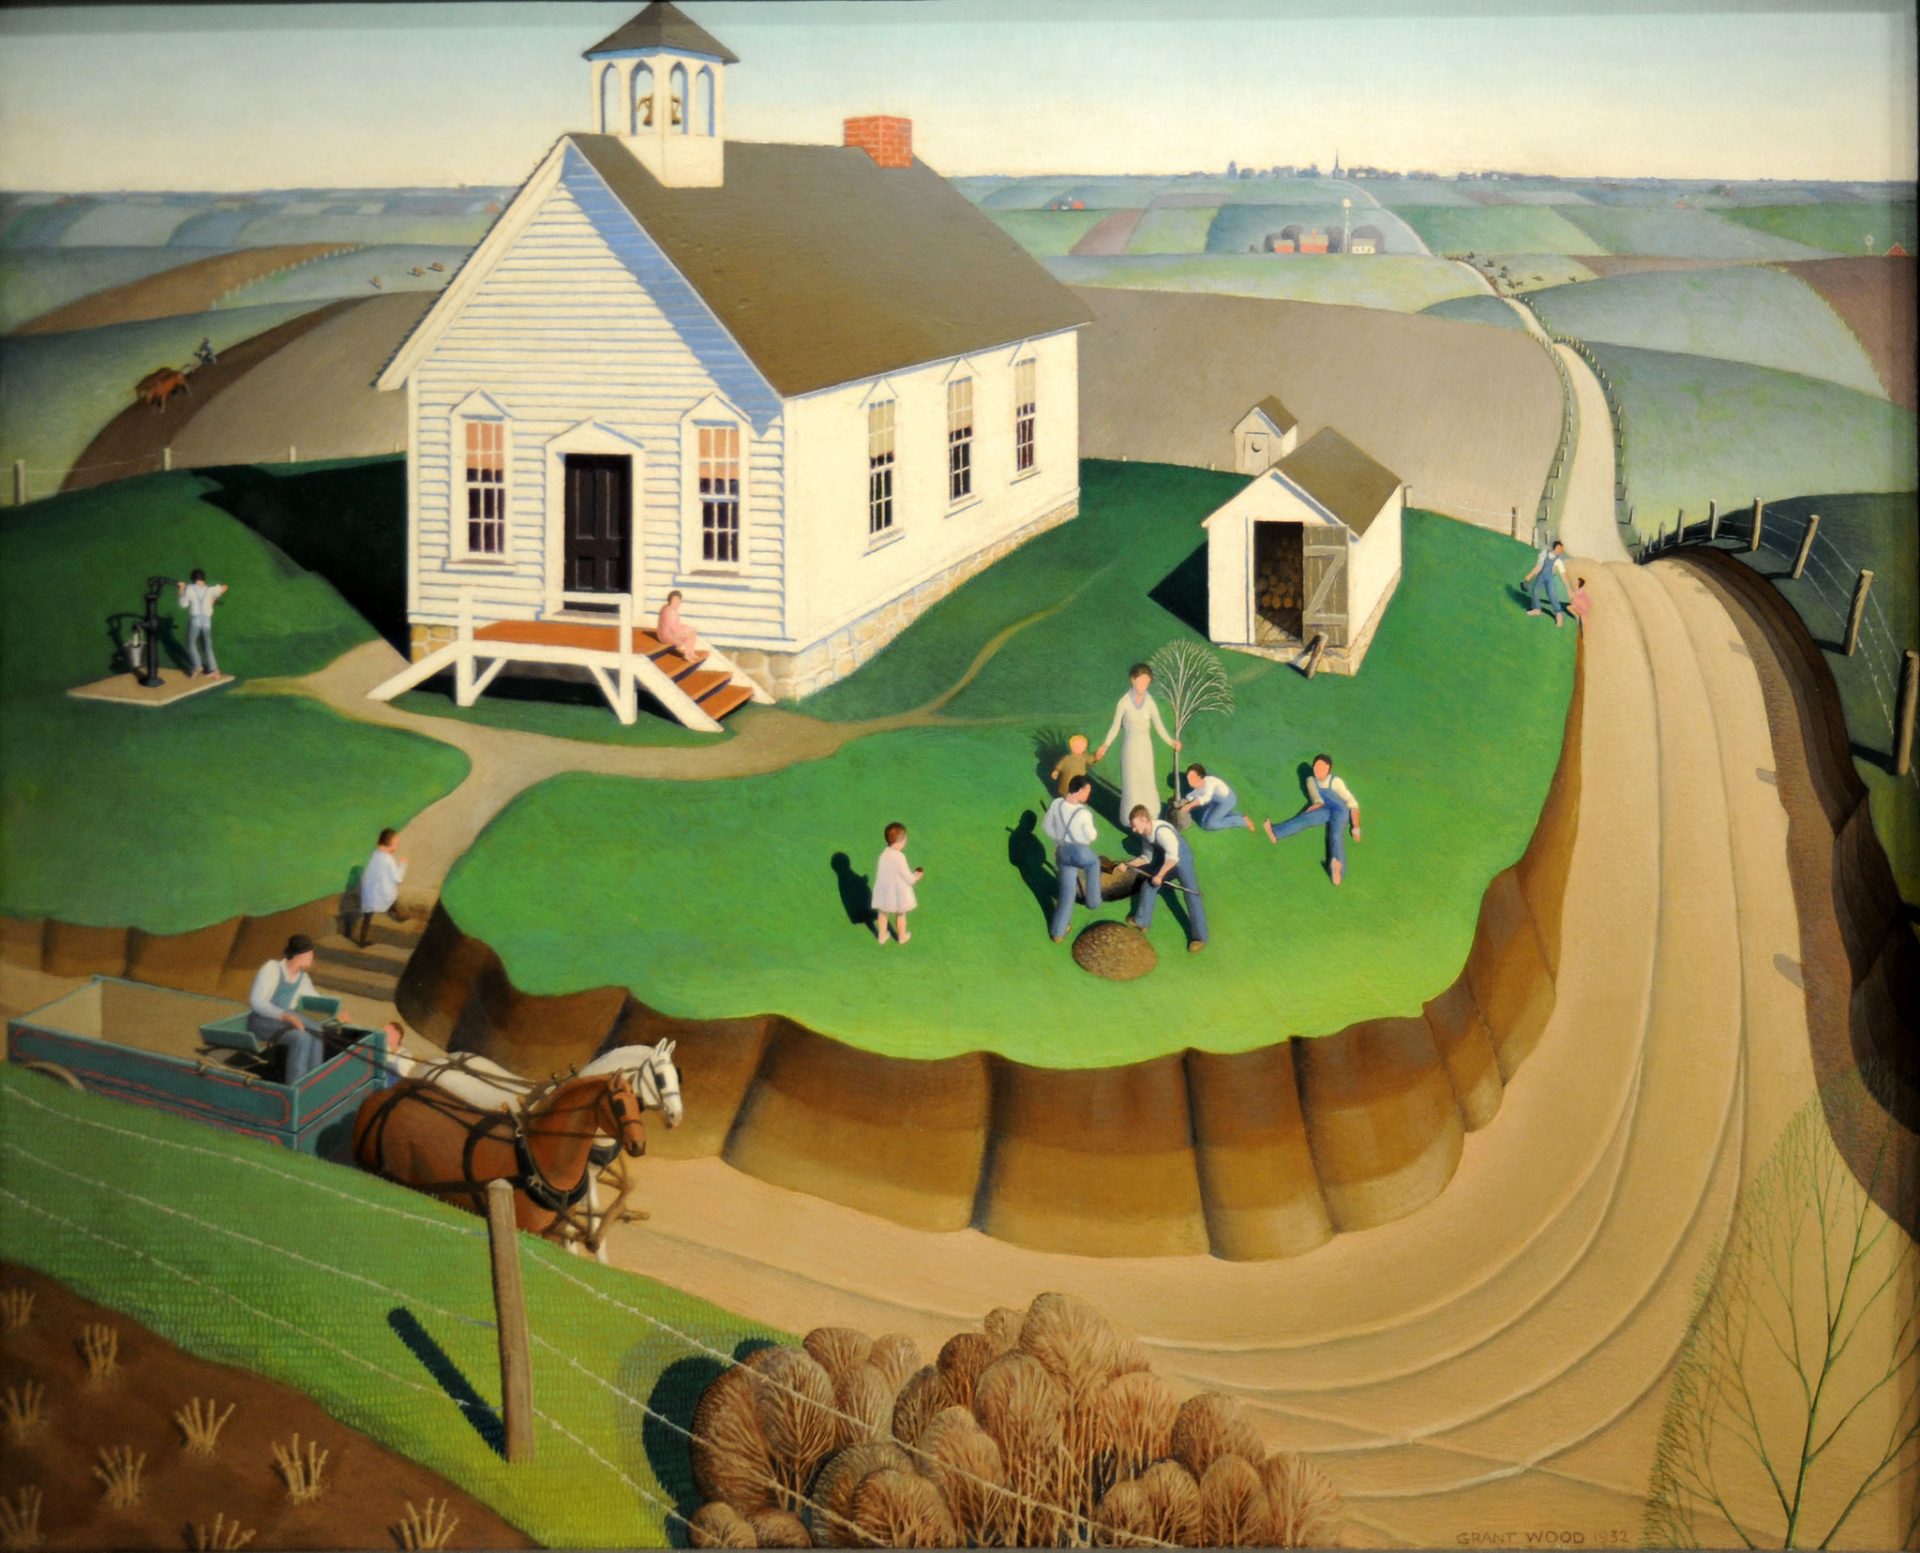 An inviting painting capturing a community event in a rural Midwestern town. In the foreground, a small boy is planting a young tree, surrounded by other townsfolk who watch on and participate in the event. The figures are depicted in Wood's characteristic stylized and simplified manner, dressed in early 20th century attire. The scene is set under a bright, clear sky, with a strong sense of light and shadow. The painting embodies a feeling of community, tradition, and a reverence for nature.